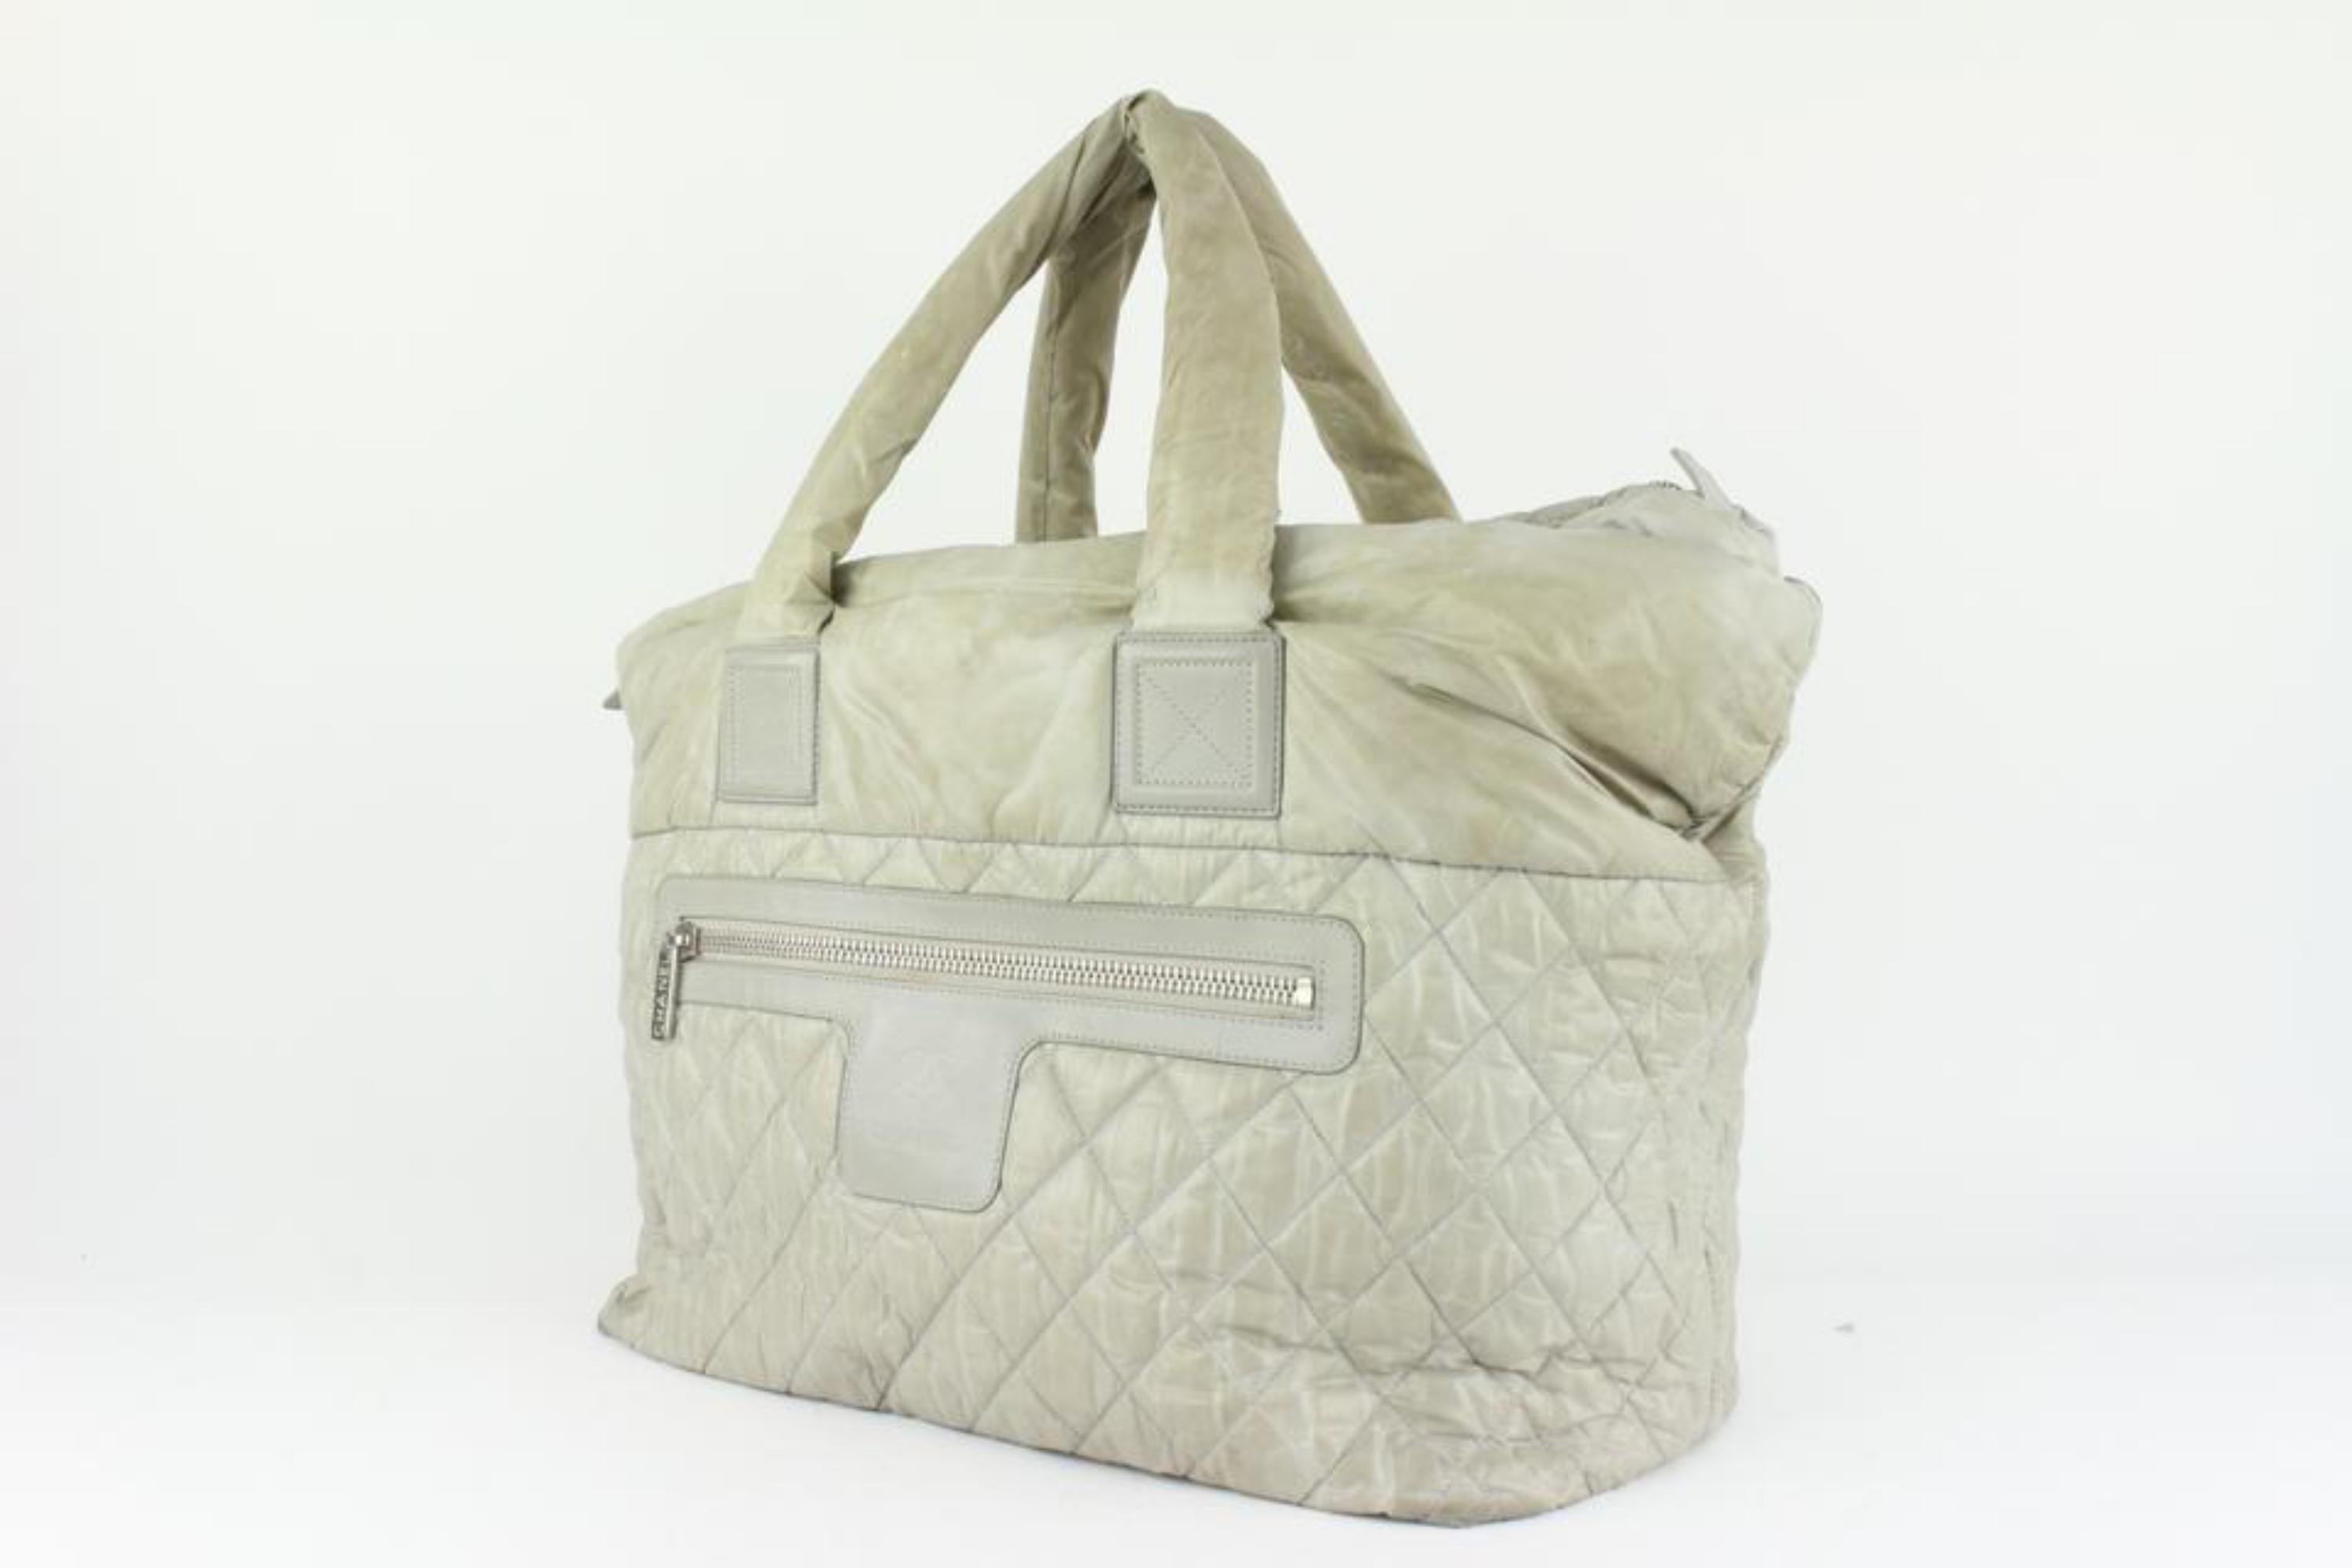 Chanel Grey Quilted Nylon Cocoon Tote Bag 1115c8
Date Code/Serial Number: 13938375
Made In: Italy
Measurements: Length:  20